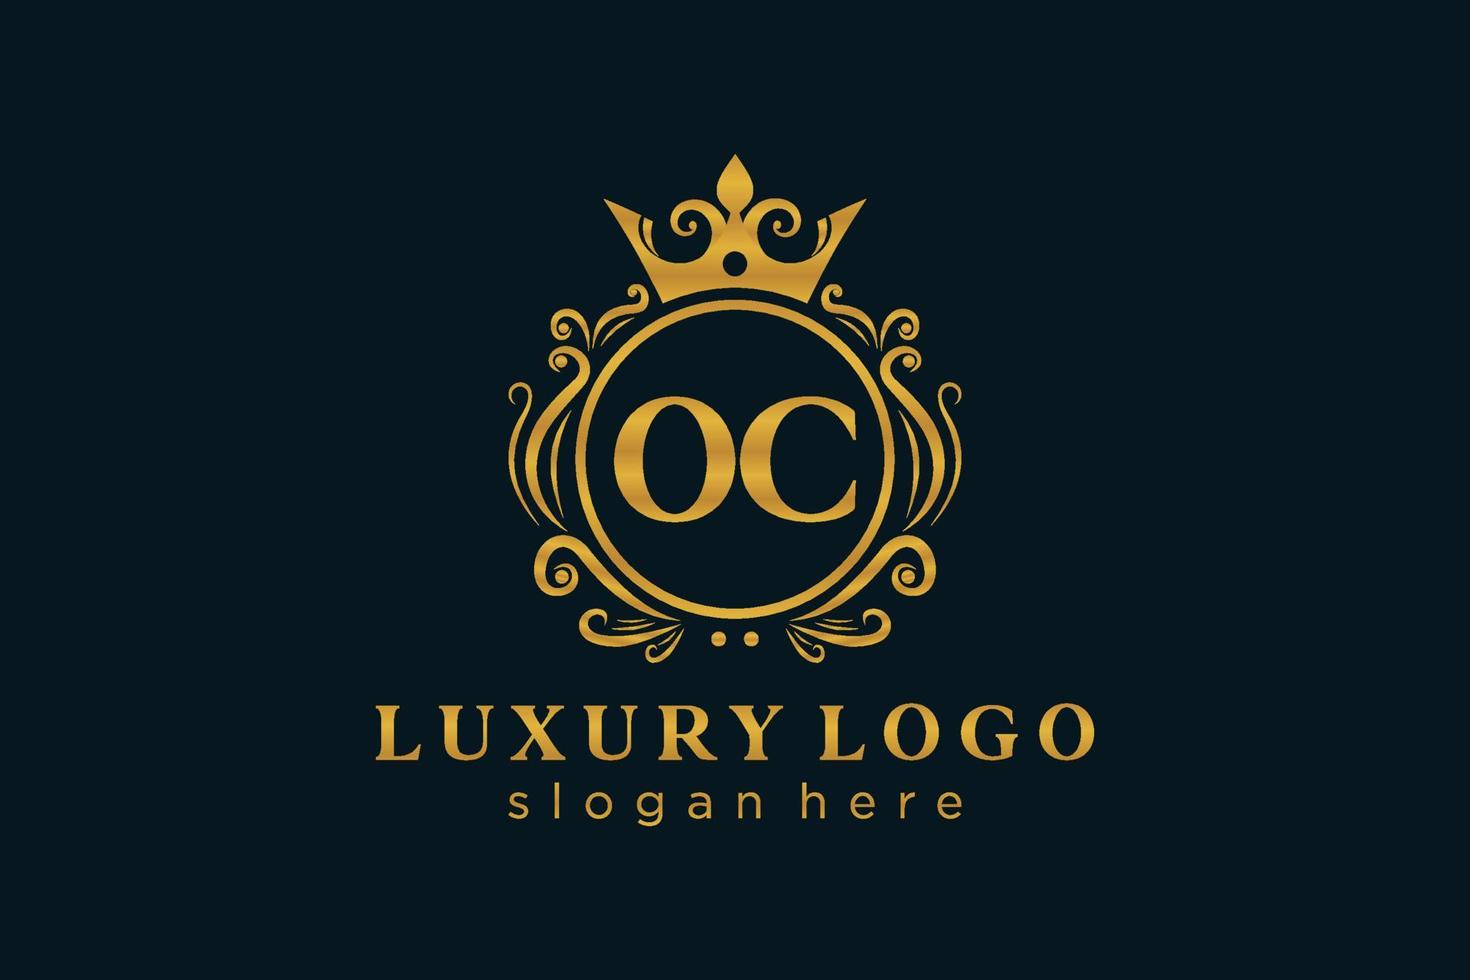 Initial OC Letter Royal Luxury Logo template in vector art for Restaurant, Royalty, Boutique, Cafe, Hotel, Heraldic, Jewelry, Fashion and other vector illustration.